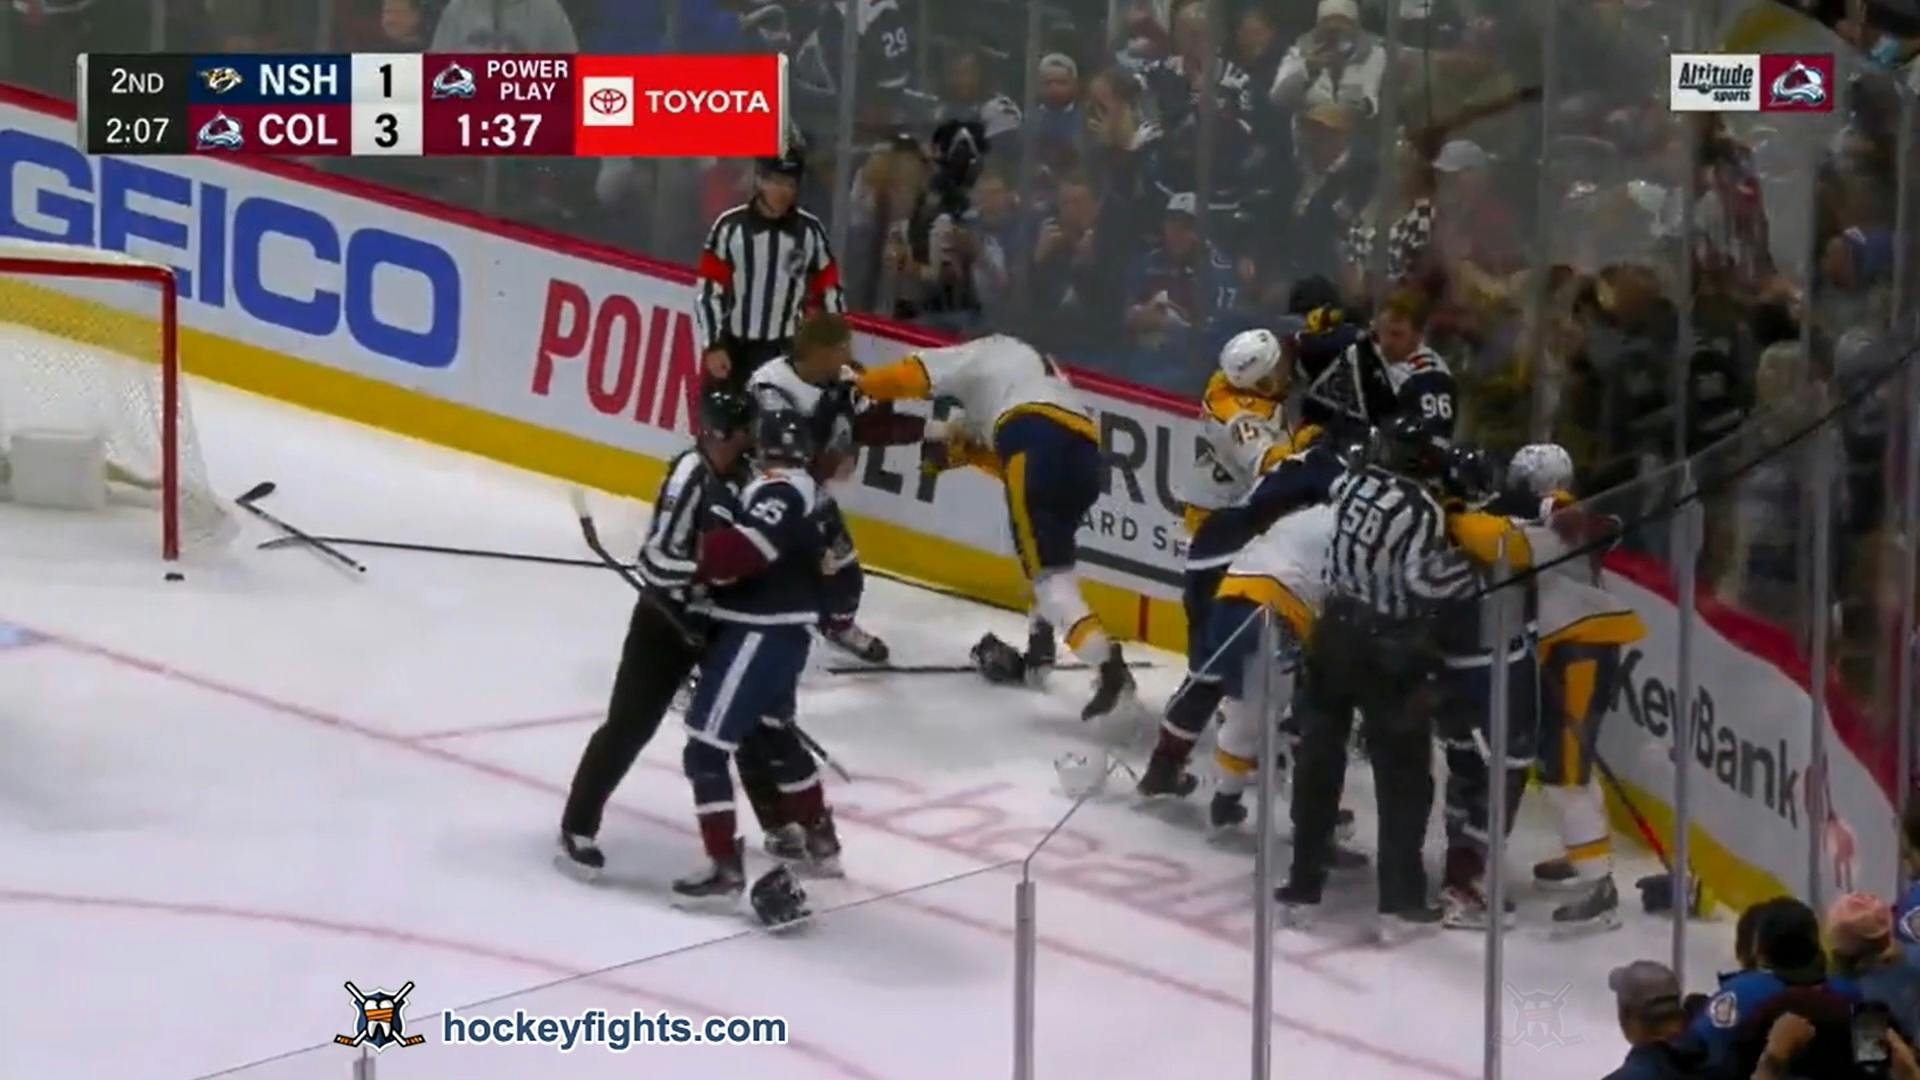 Trouba's second big hit and fight in as many games : Gabriel Landeskog vs Jacob  Trouba from the Colorado Avalanche at New York Rangers game on Dec 8, 2021  : r/rangers